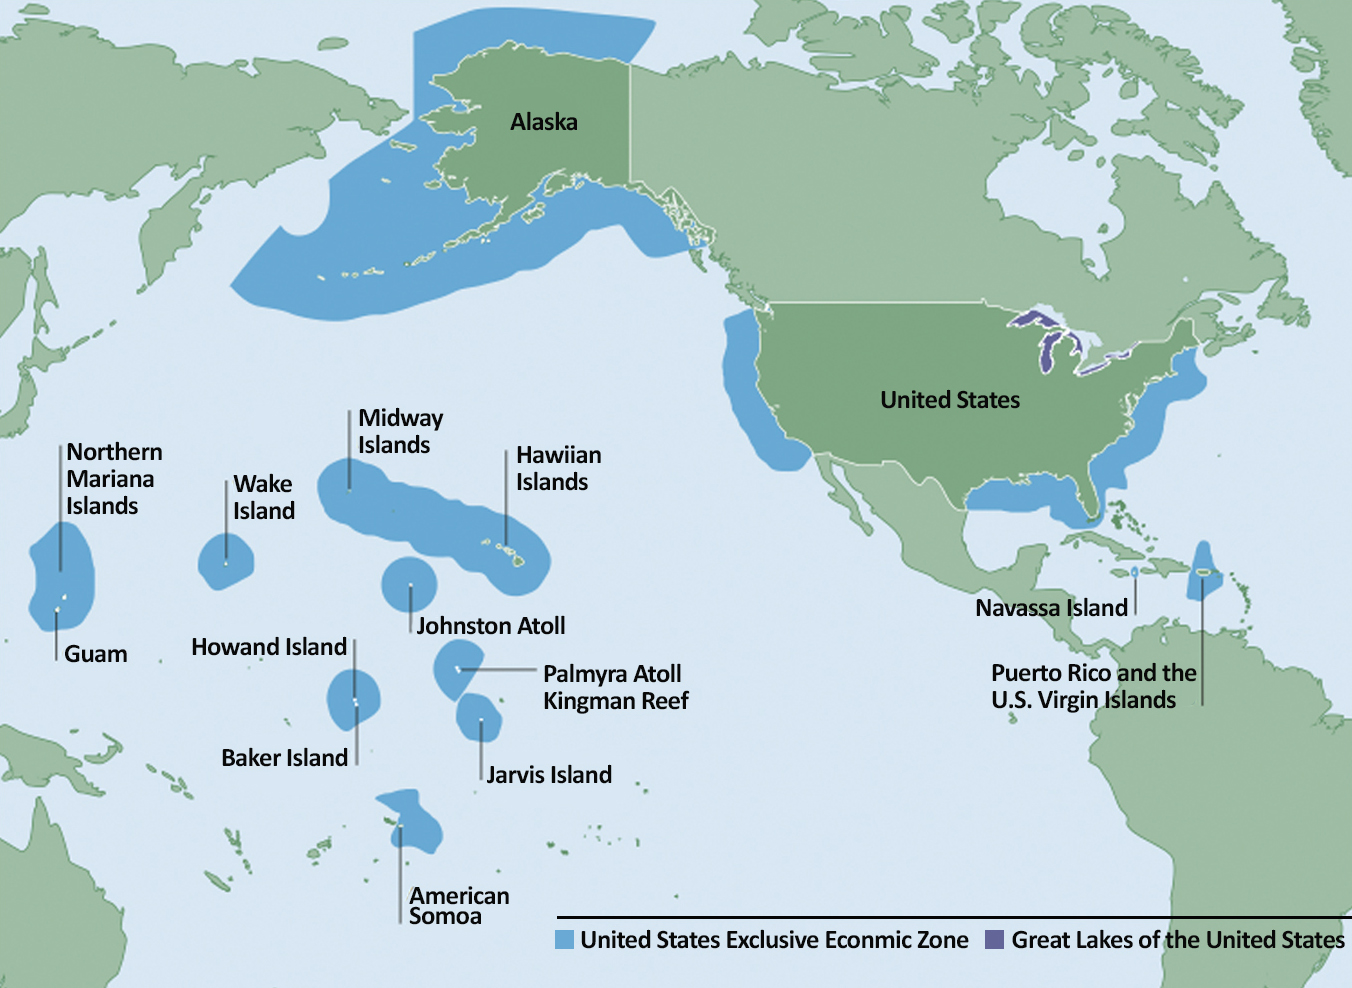 Dark blue areas on this map outline the Exclusive Economic Zone (EEZ) of the United States and affiliated islands. The U.S. EEZ is larger than its land area.